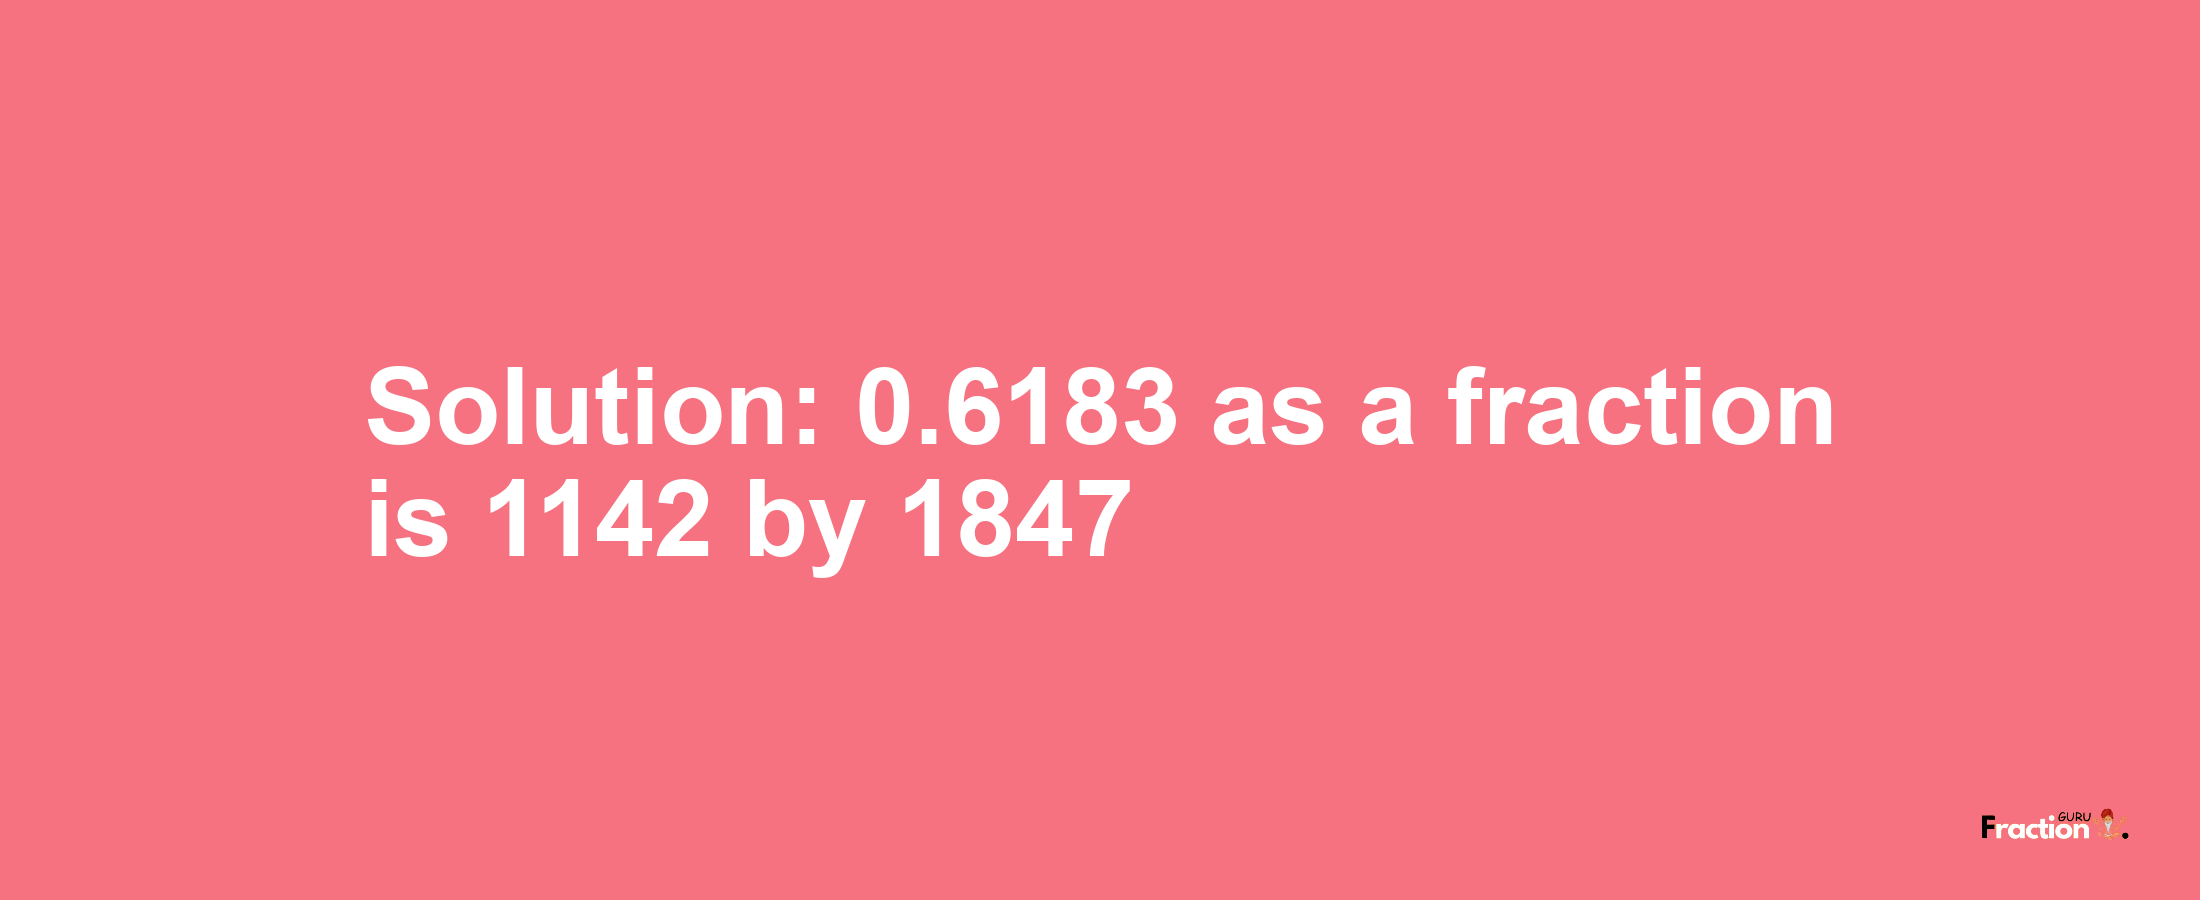 Solution:0.6183 as a fraction is 1142/1847